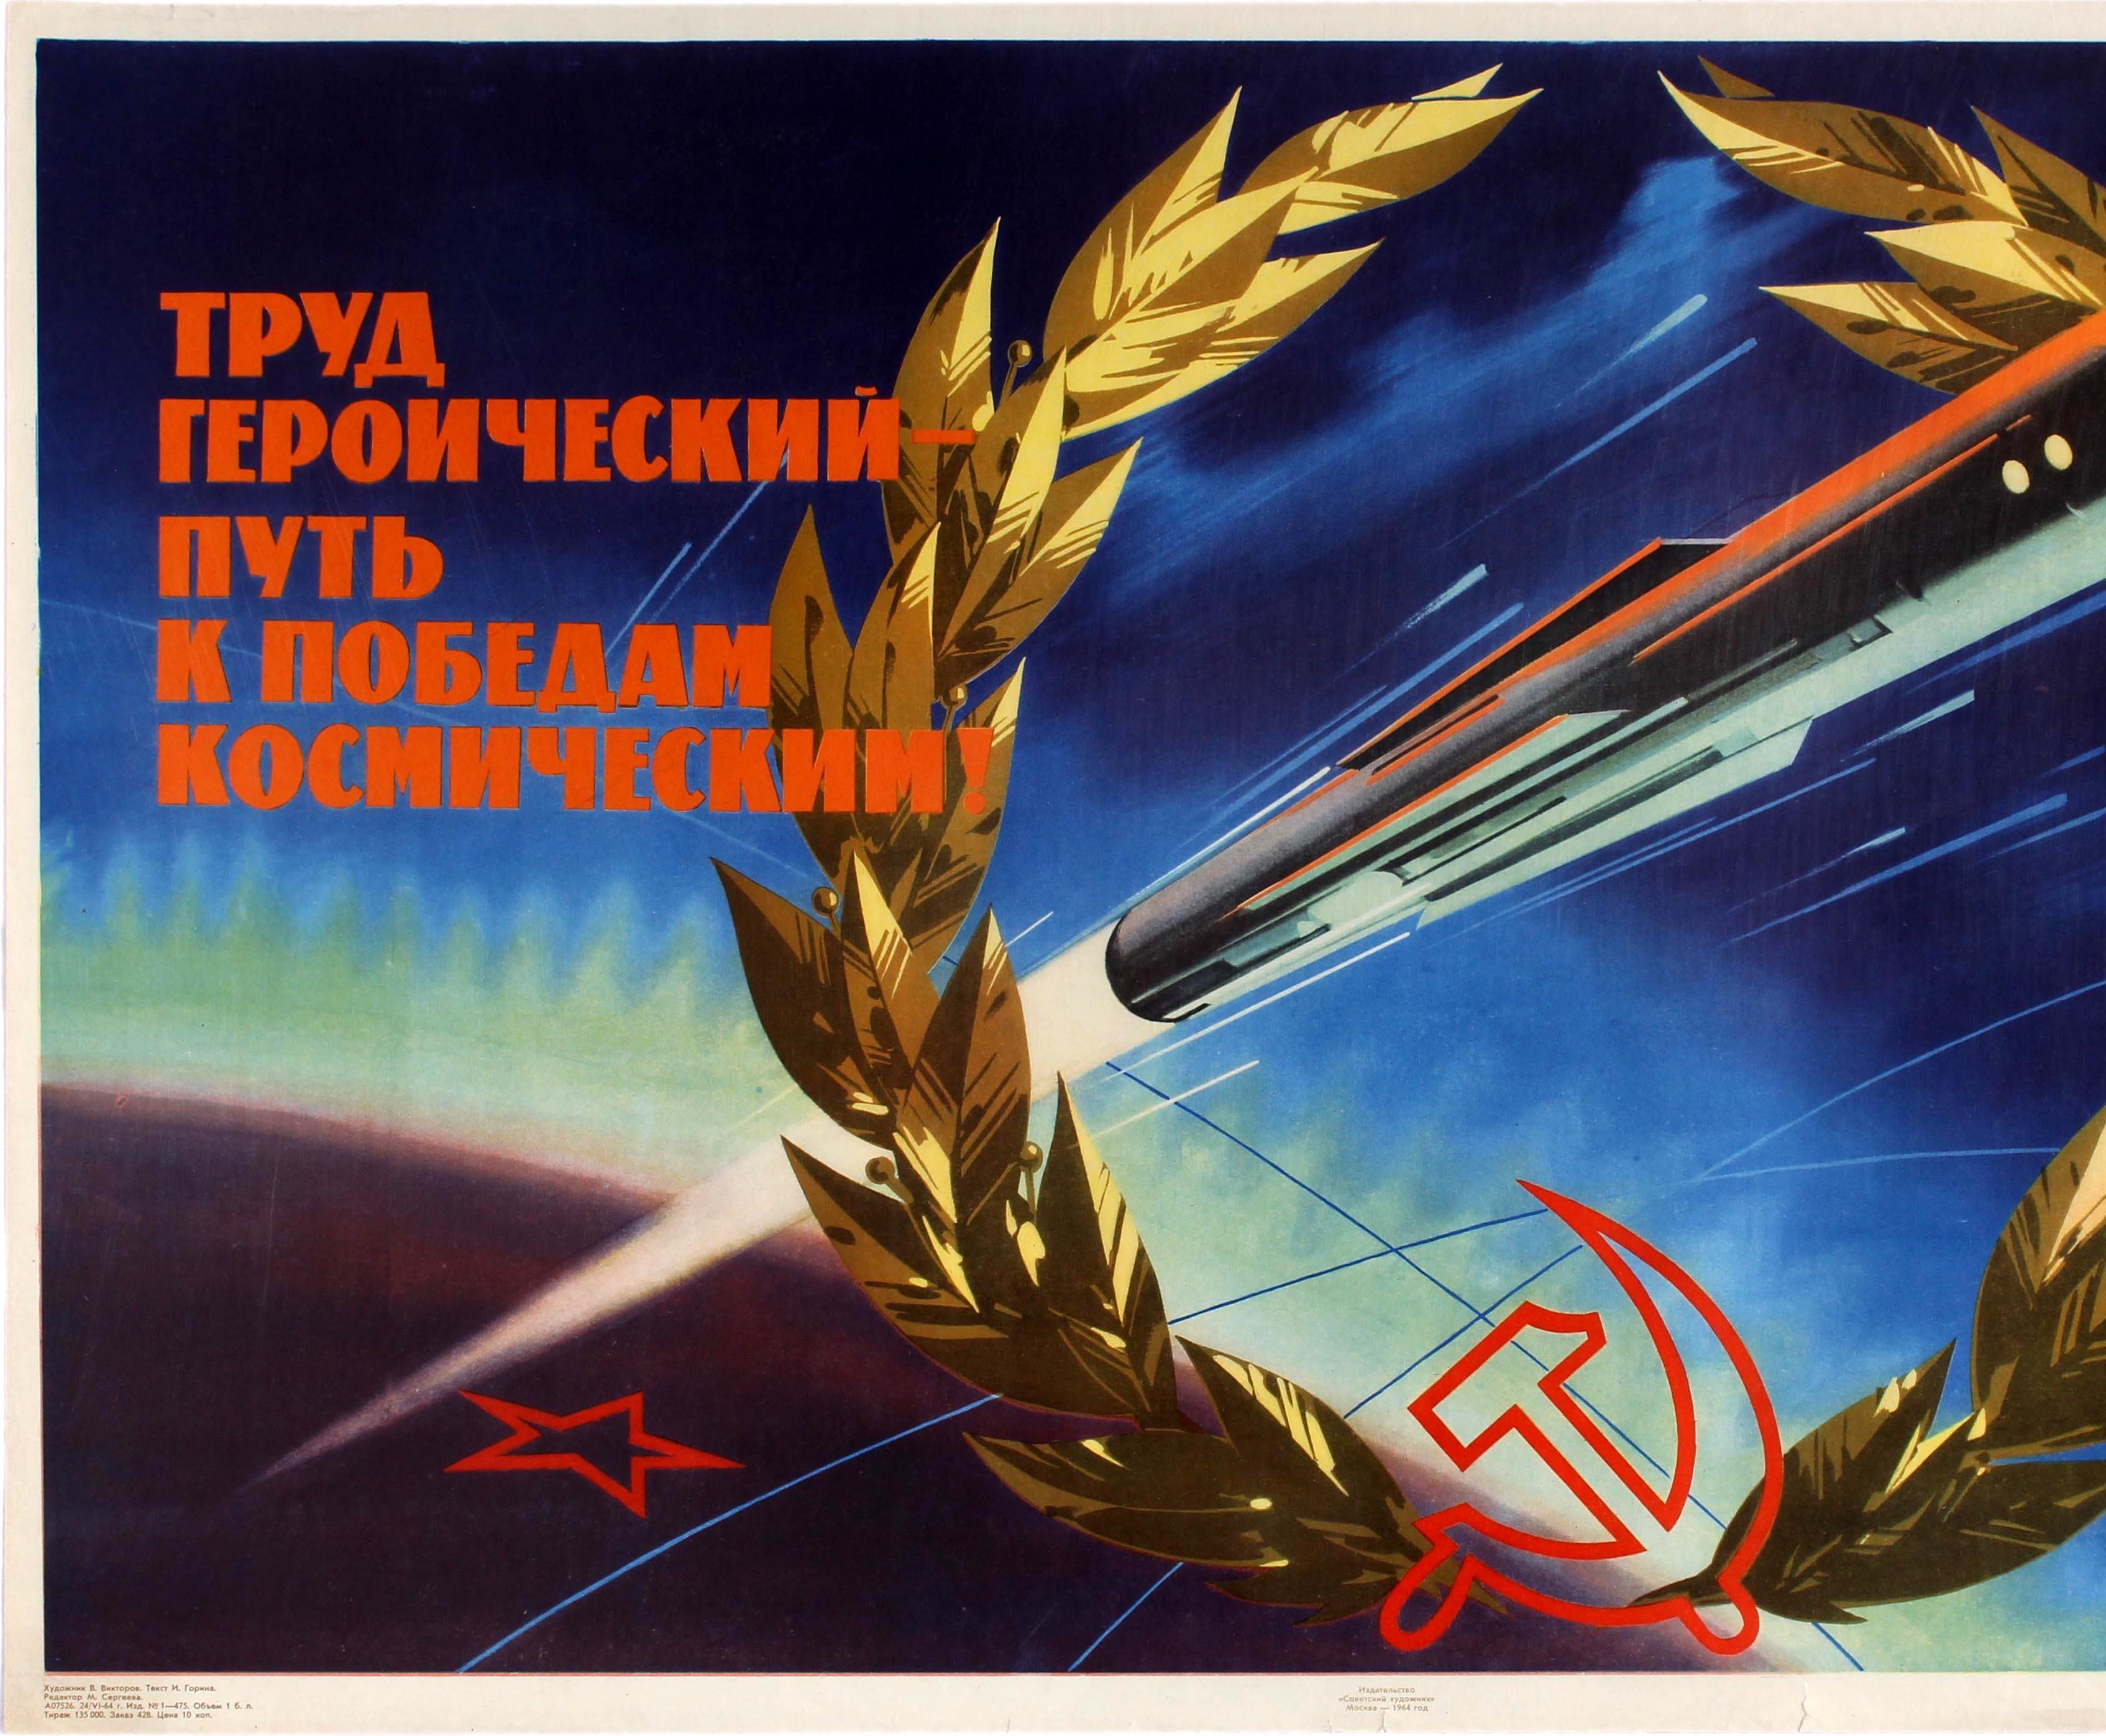 Original vintage Soviet space race propaganda poster with the slogan - Heroic Labour the path to cosmic victories! - featuring a striking design showing a space rocket shooting through a communist wreath of wheat with a hammer and sickle symbol on